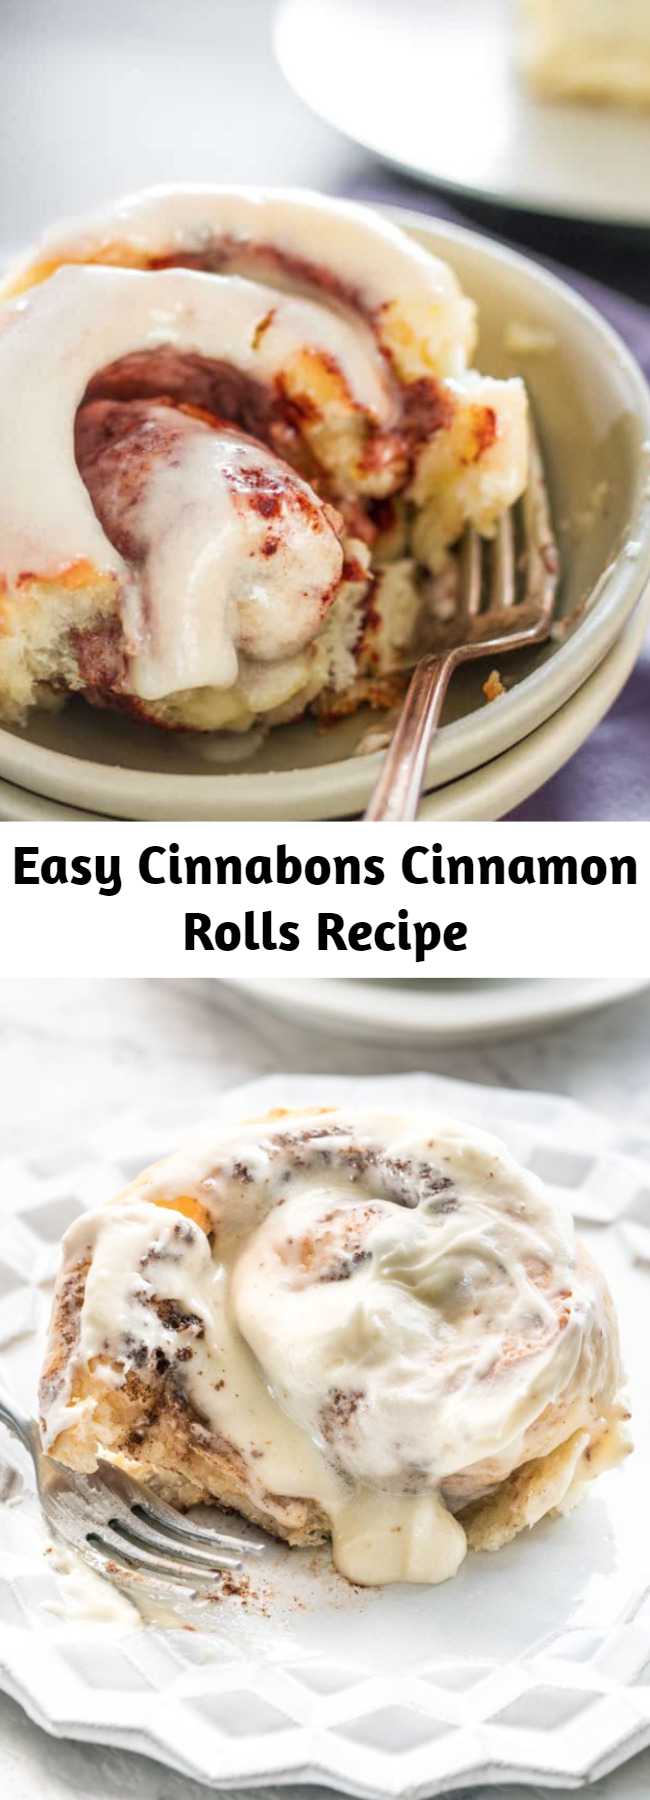 Easy Cinnabons Cinnamon Rolls Recipe - A cinnabon copycat recipe, about the closest you’ll get to the real thing. Super easy to make.